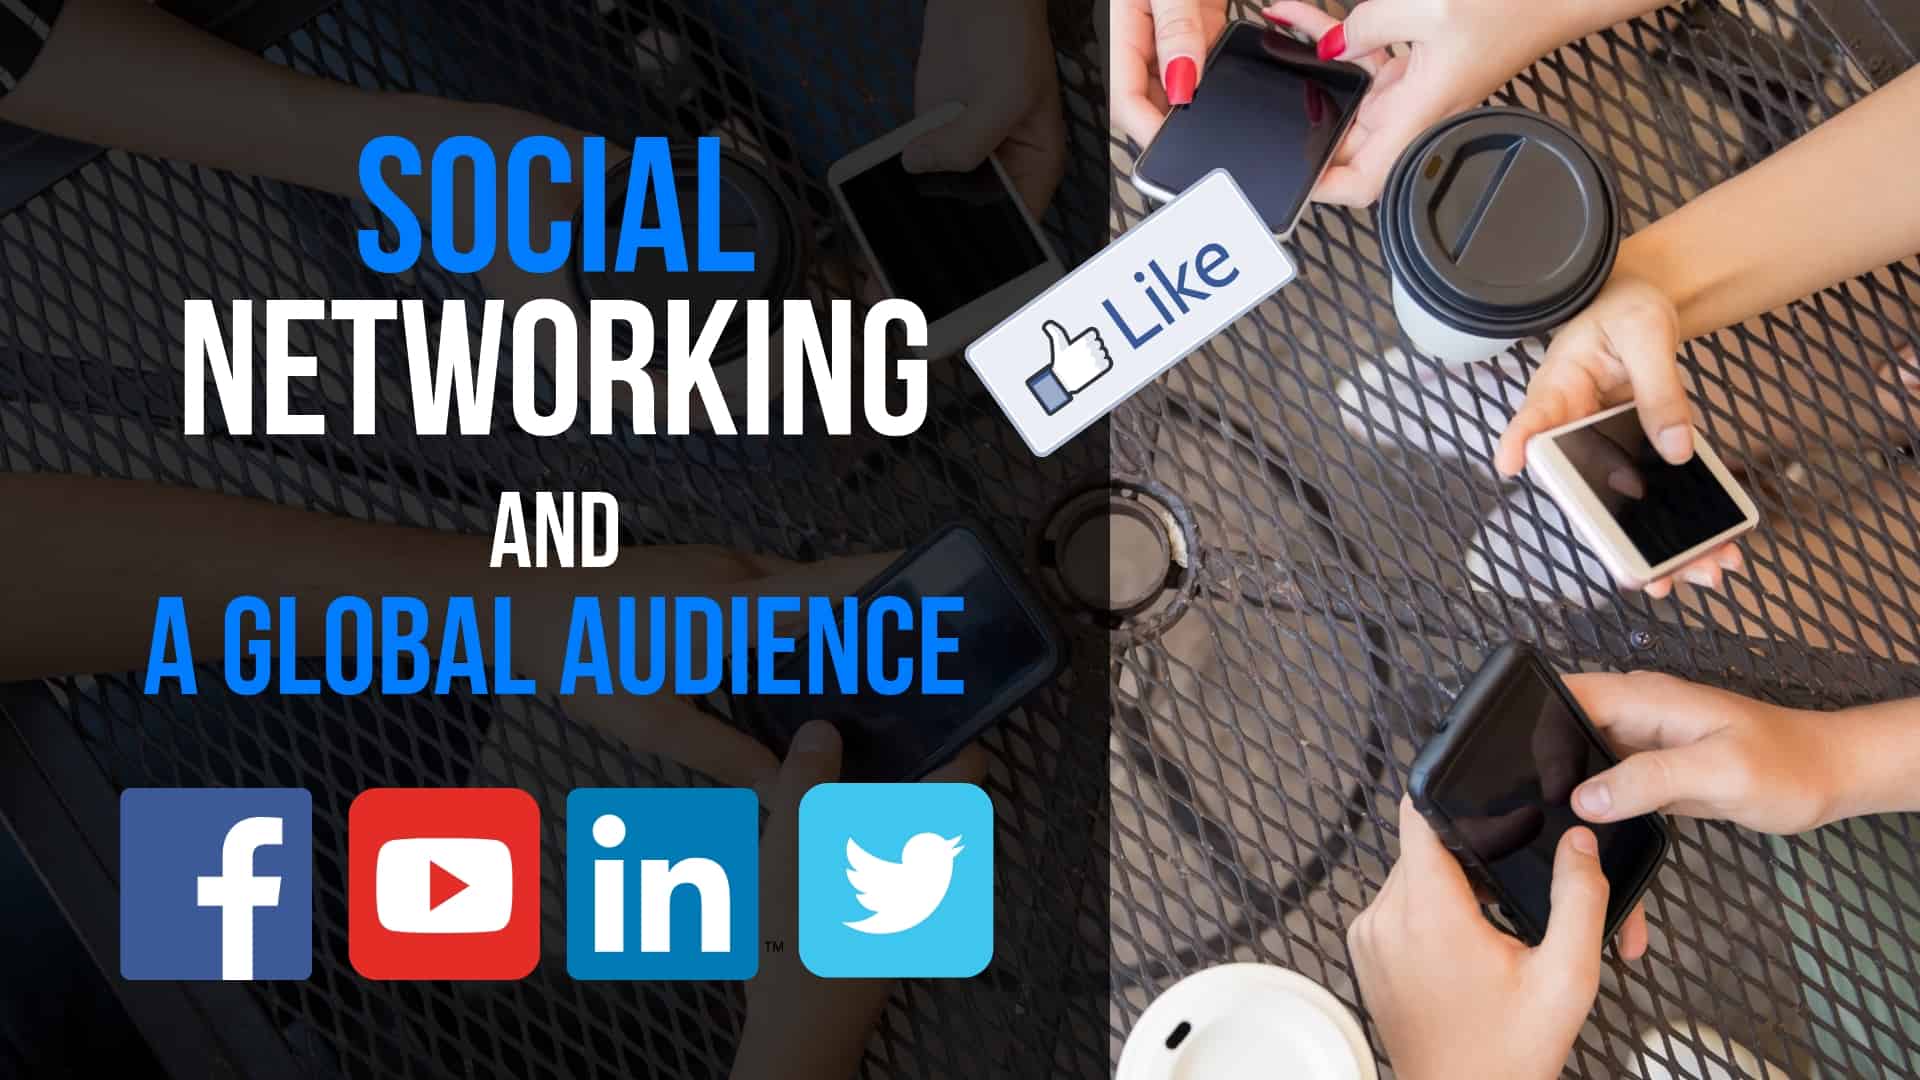 Social network and a global audience